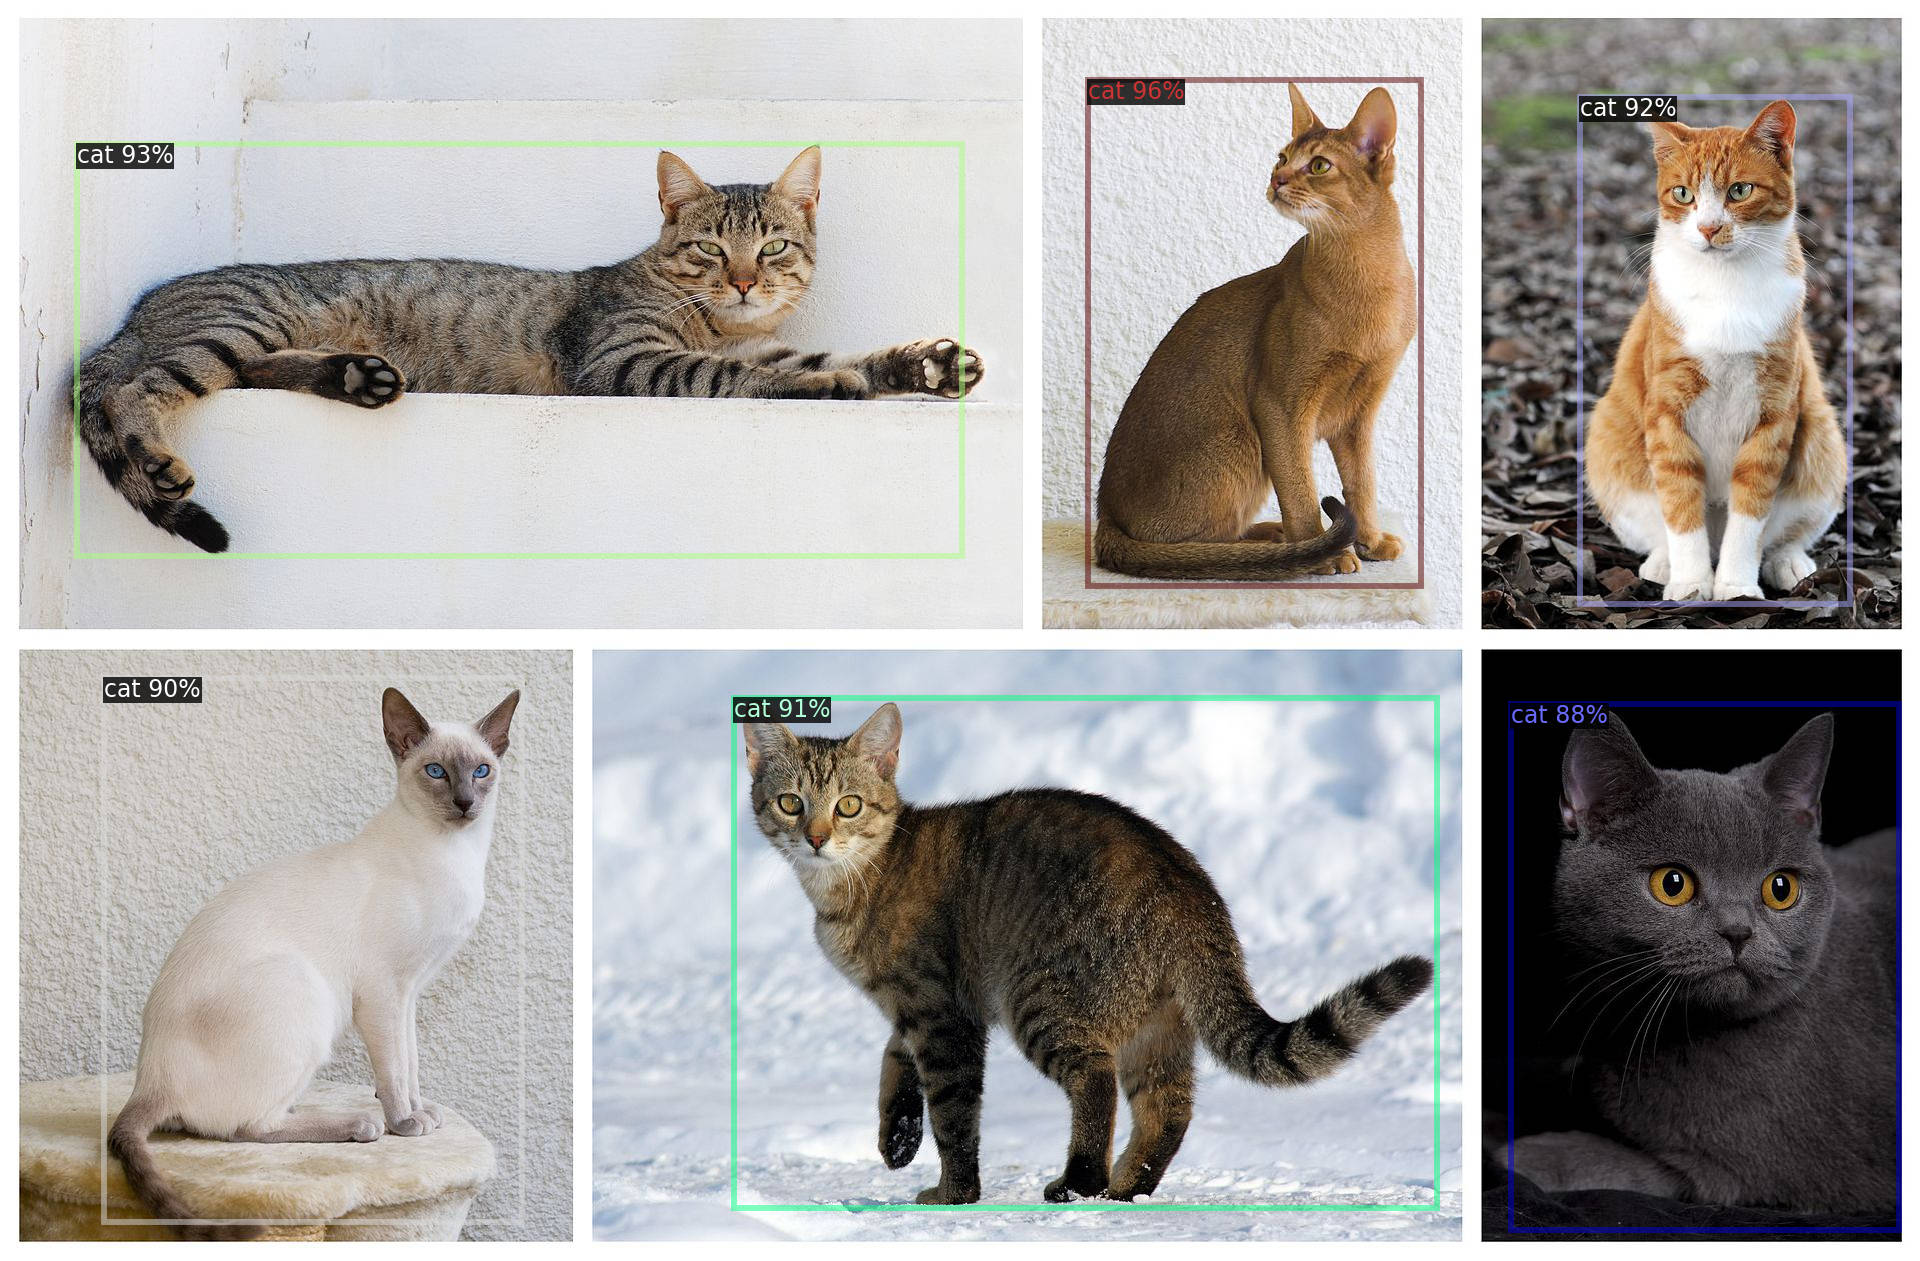 Cats detected by RetinaNet R101